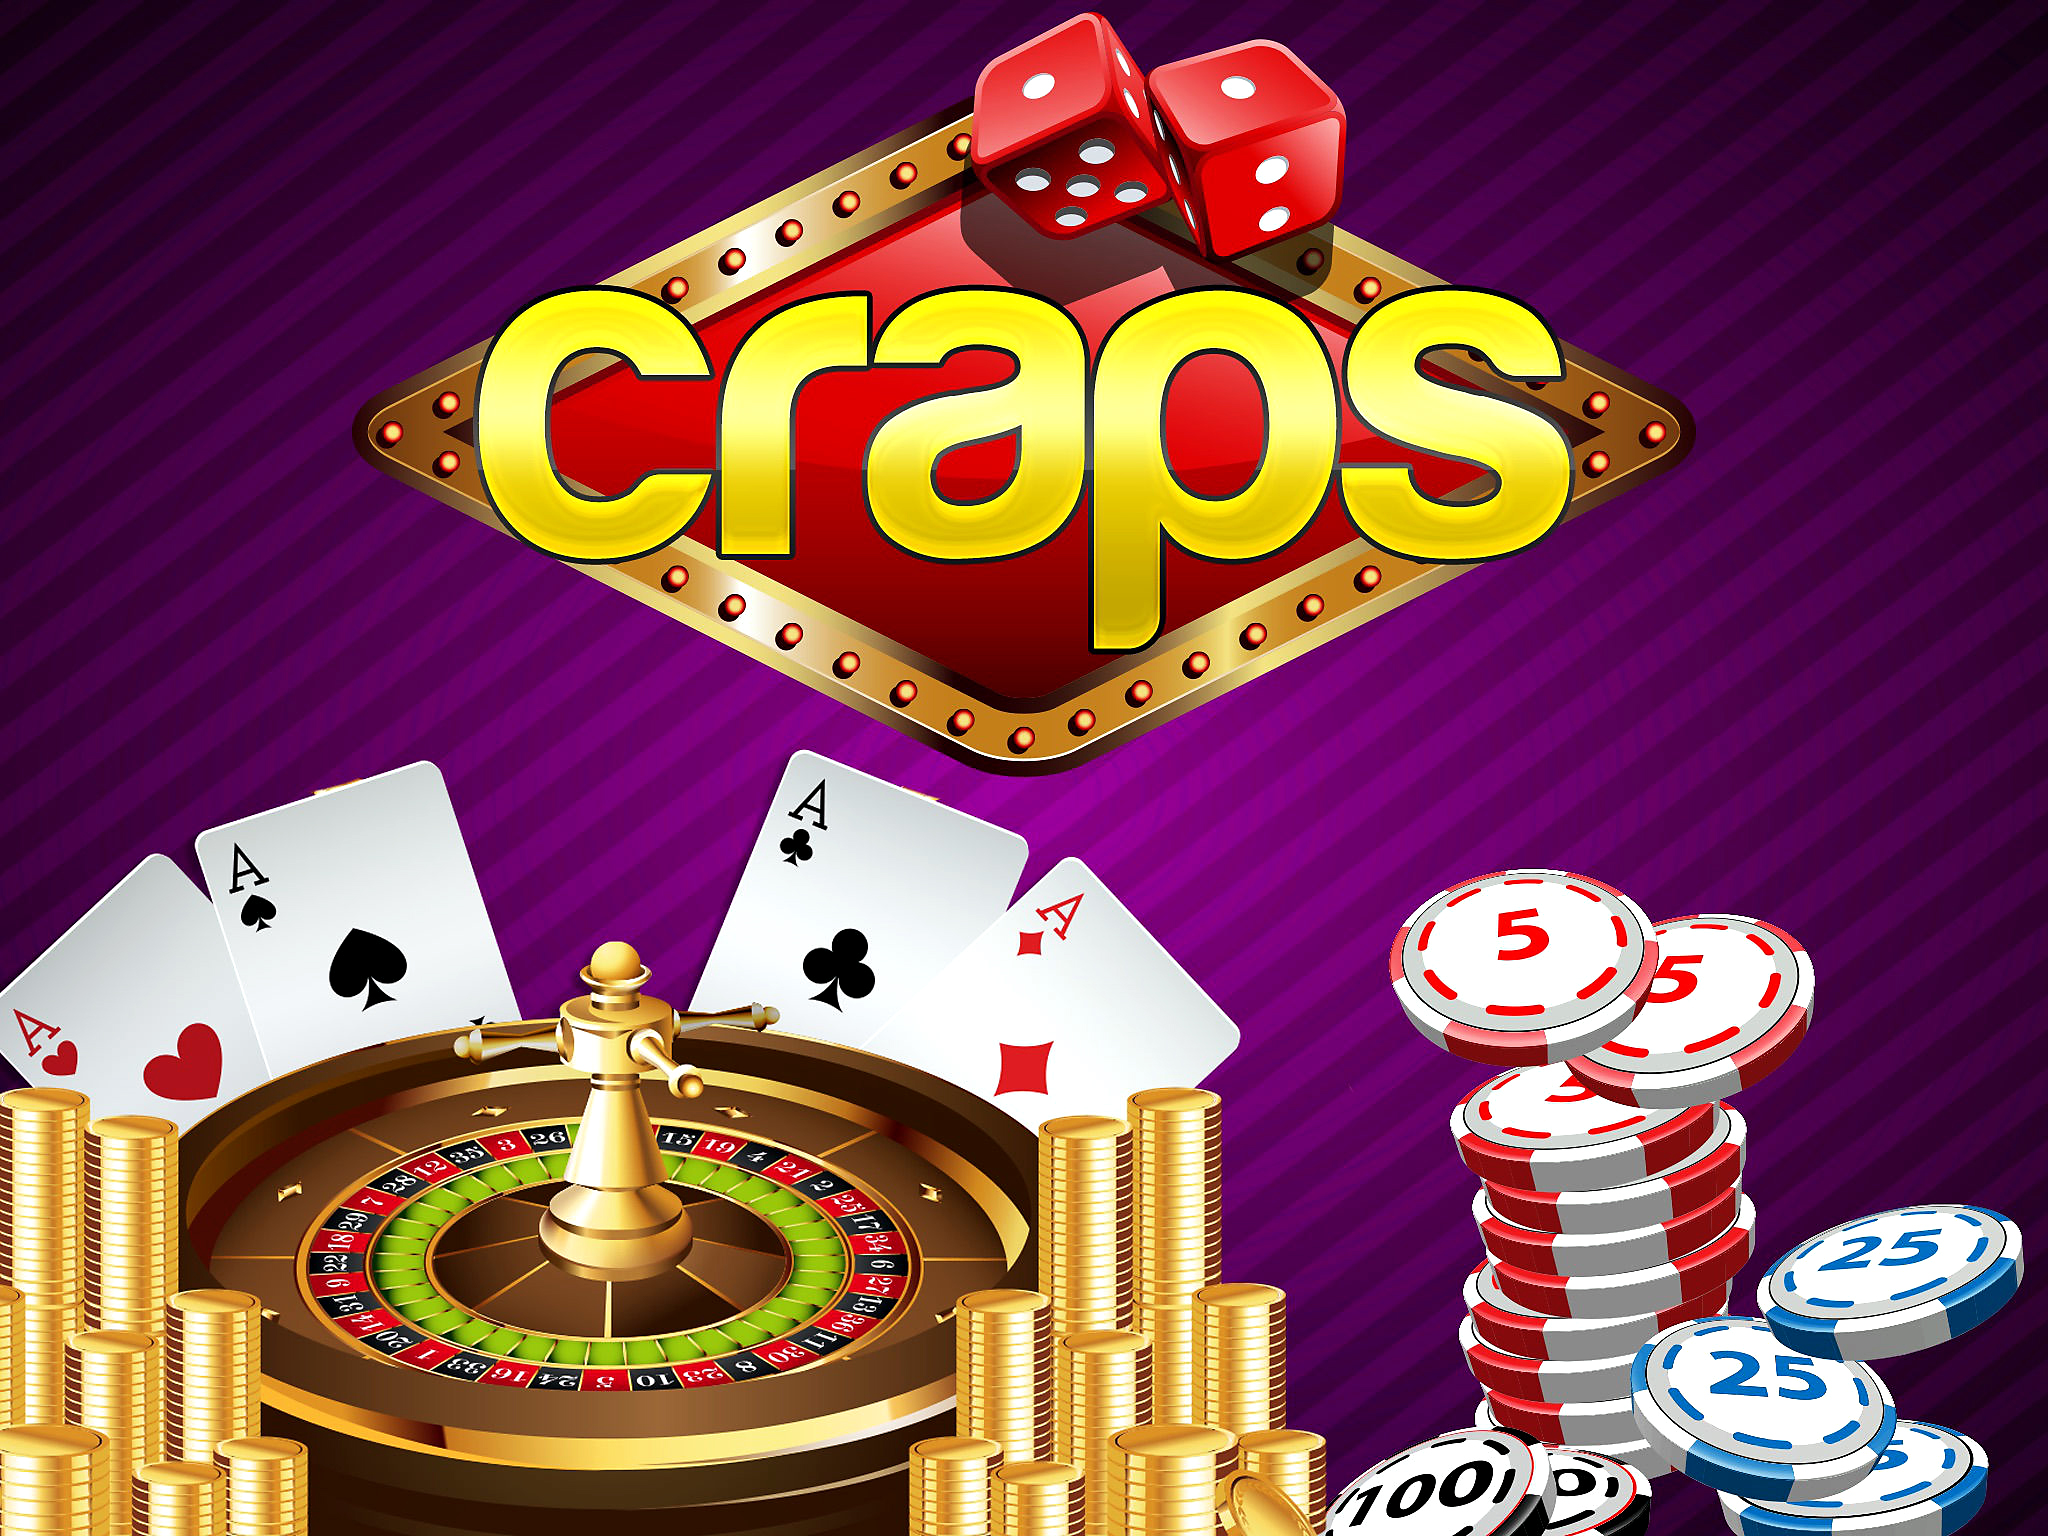 play real casino games online